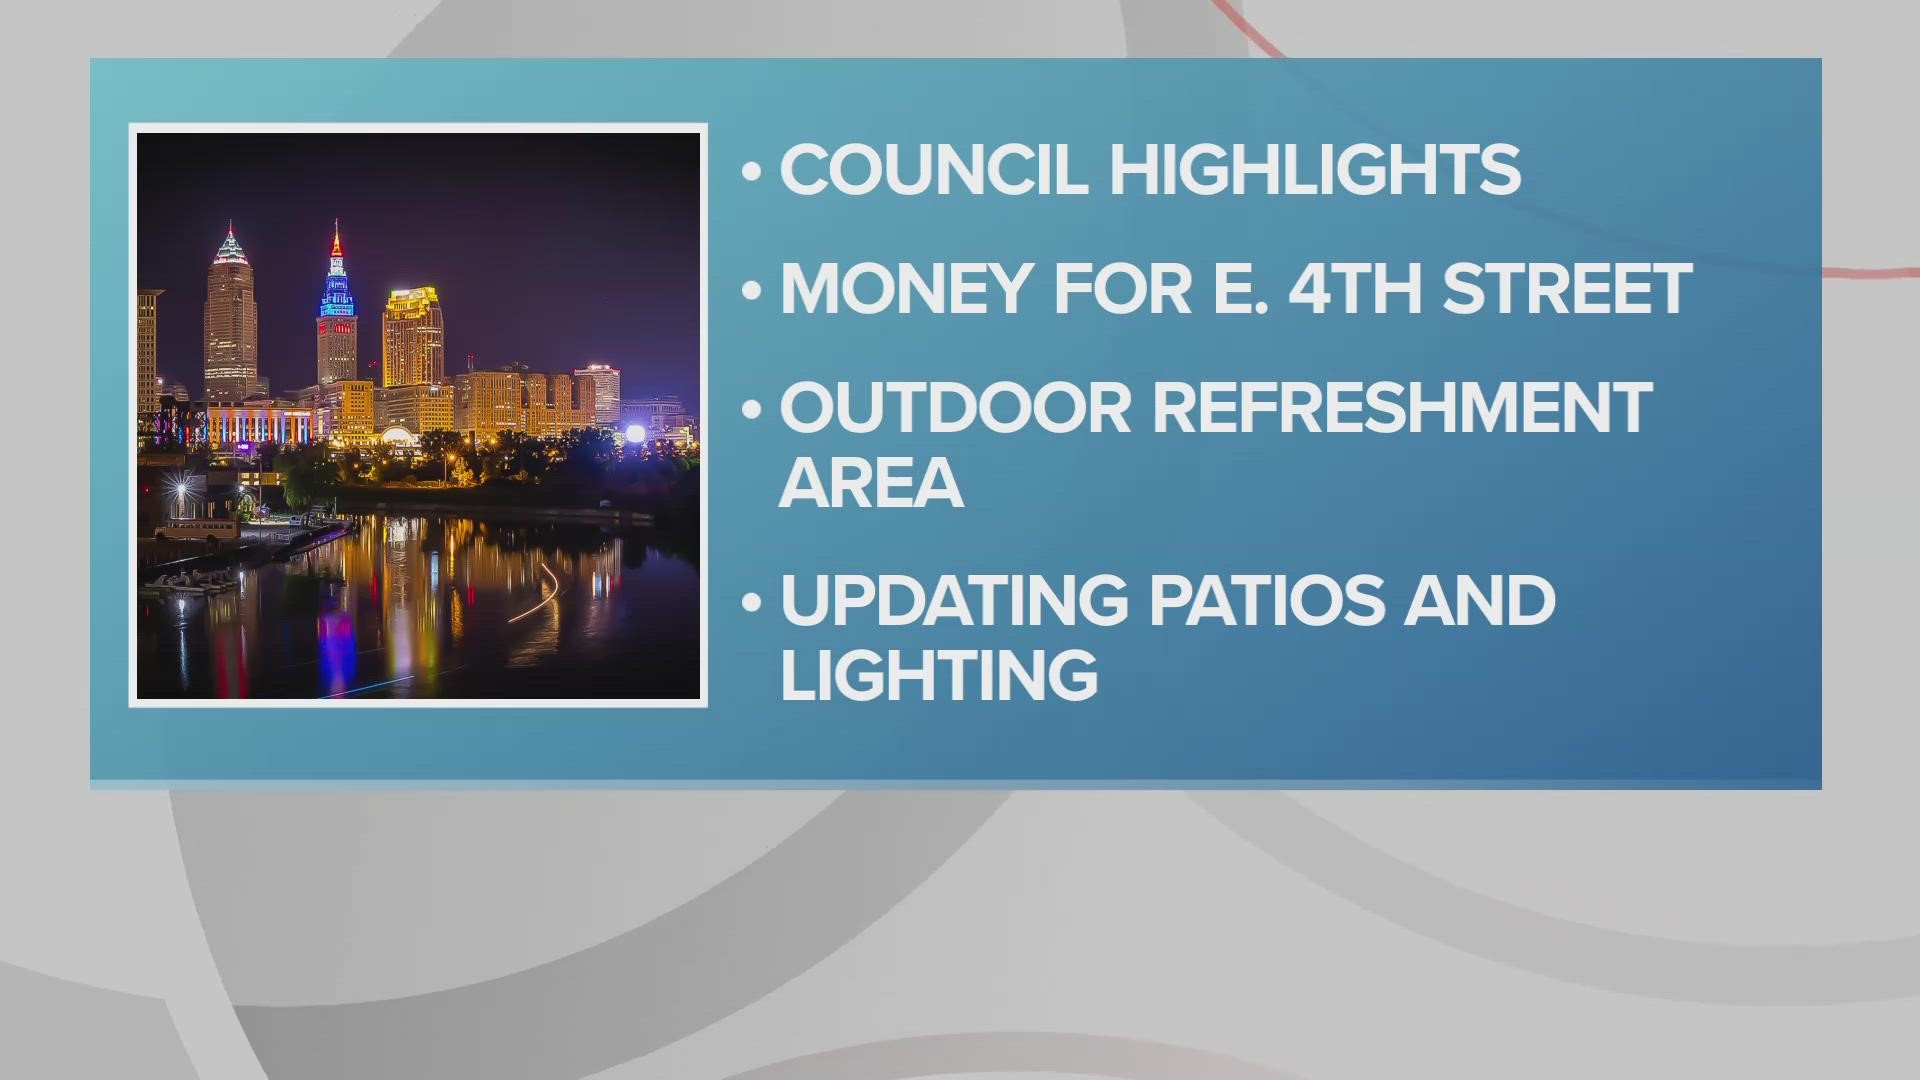 The $1.65 million plan would include creating the city's first designated outdoor refreshment area (DORA).